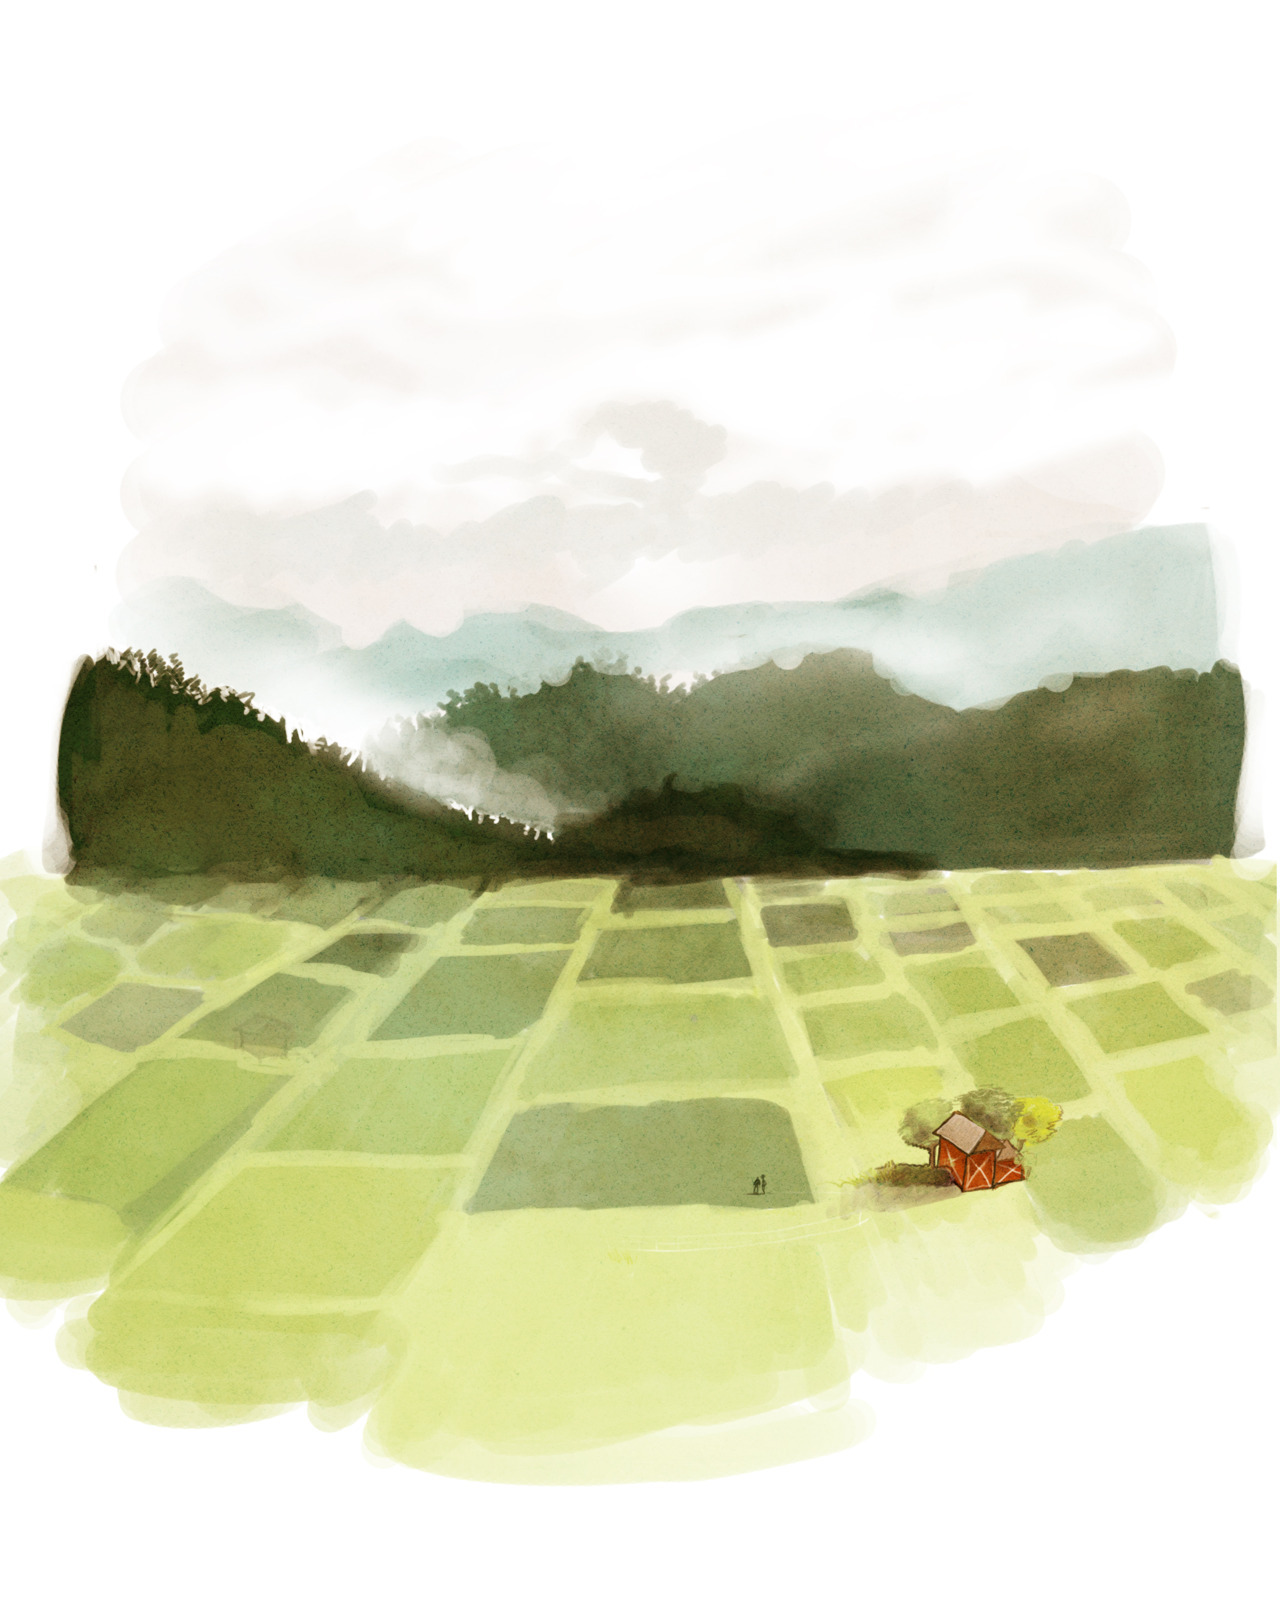 digital piece inspired by scenery on a day-long car ride. (Photoshop, 2012). more art at my tumblr.